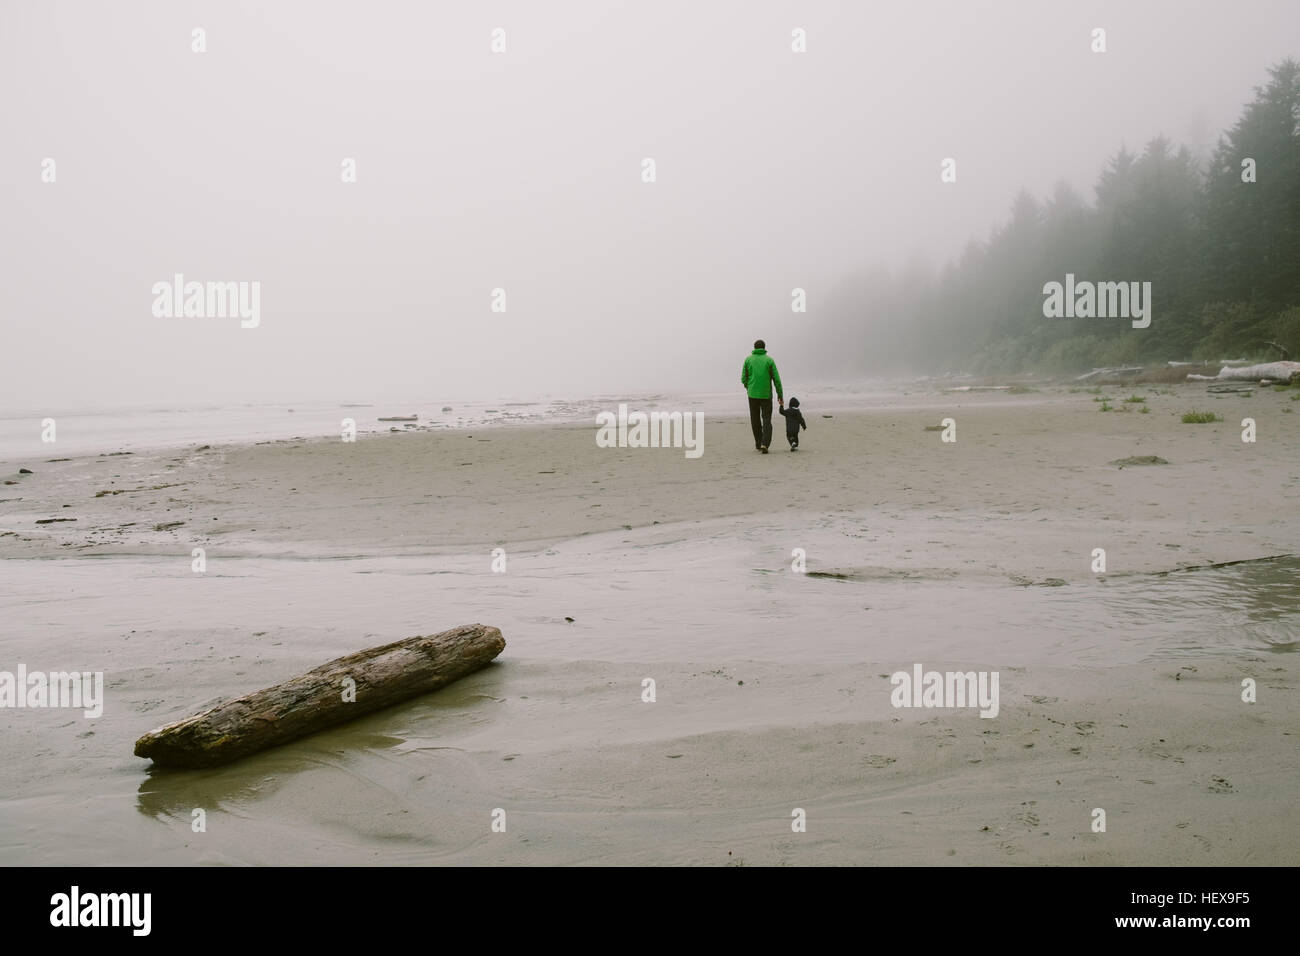 Father and son walking on beach, rear view, Long Beach, Vancouver Island, British Columbia, Canada Stock Photo